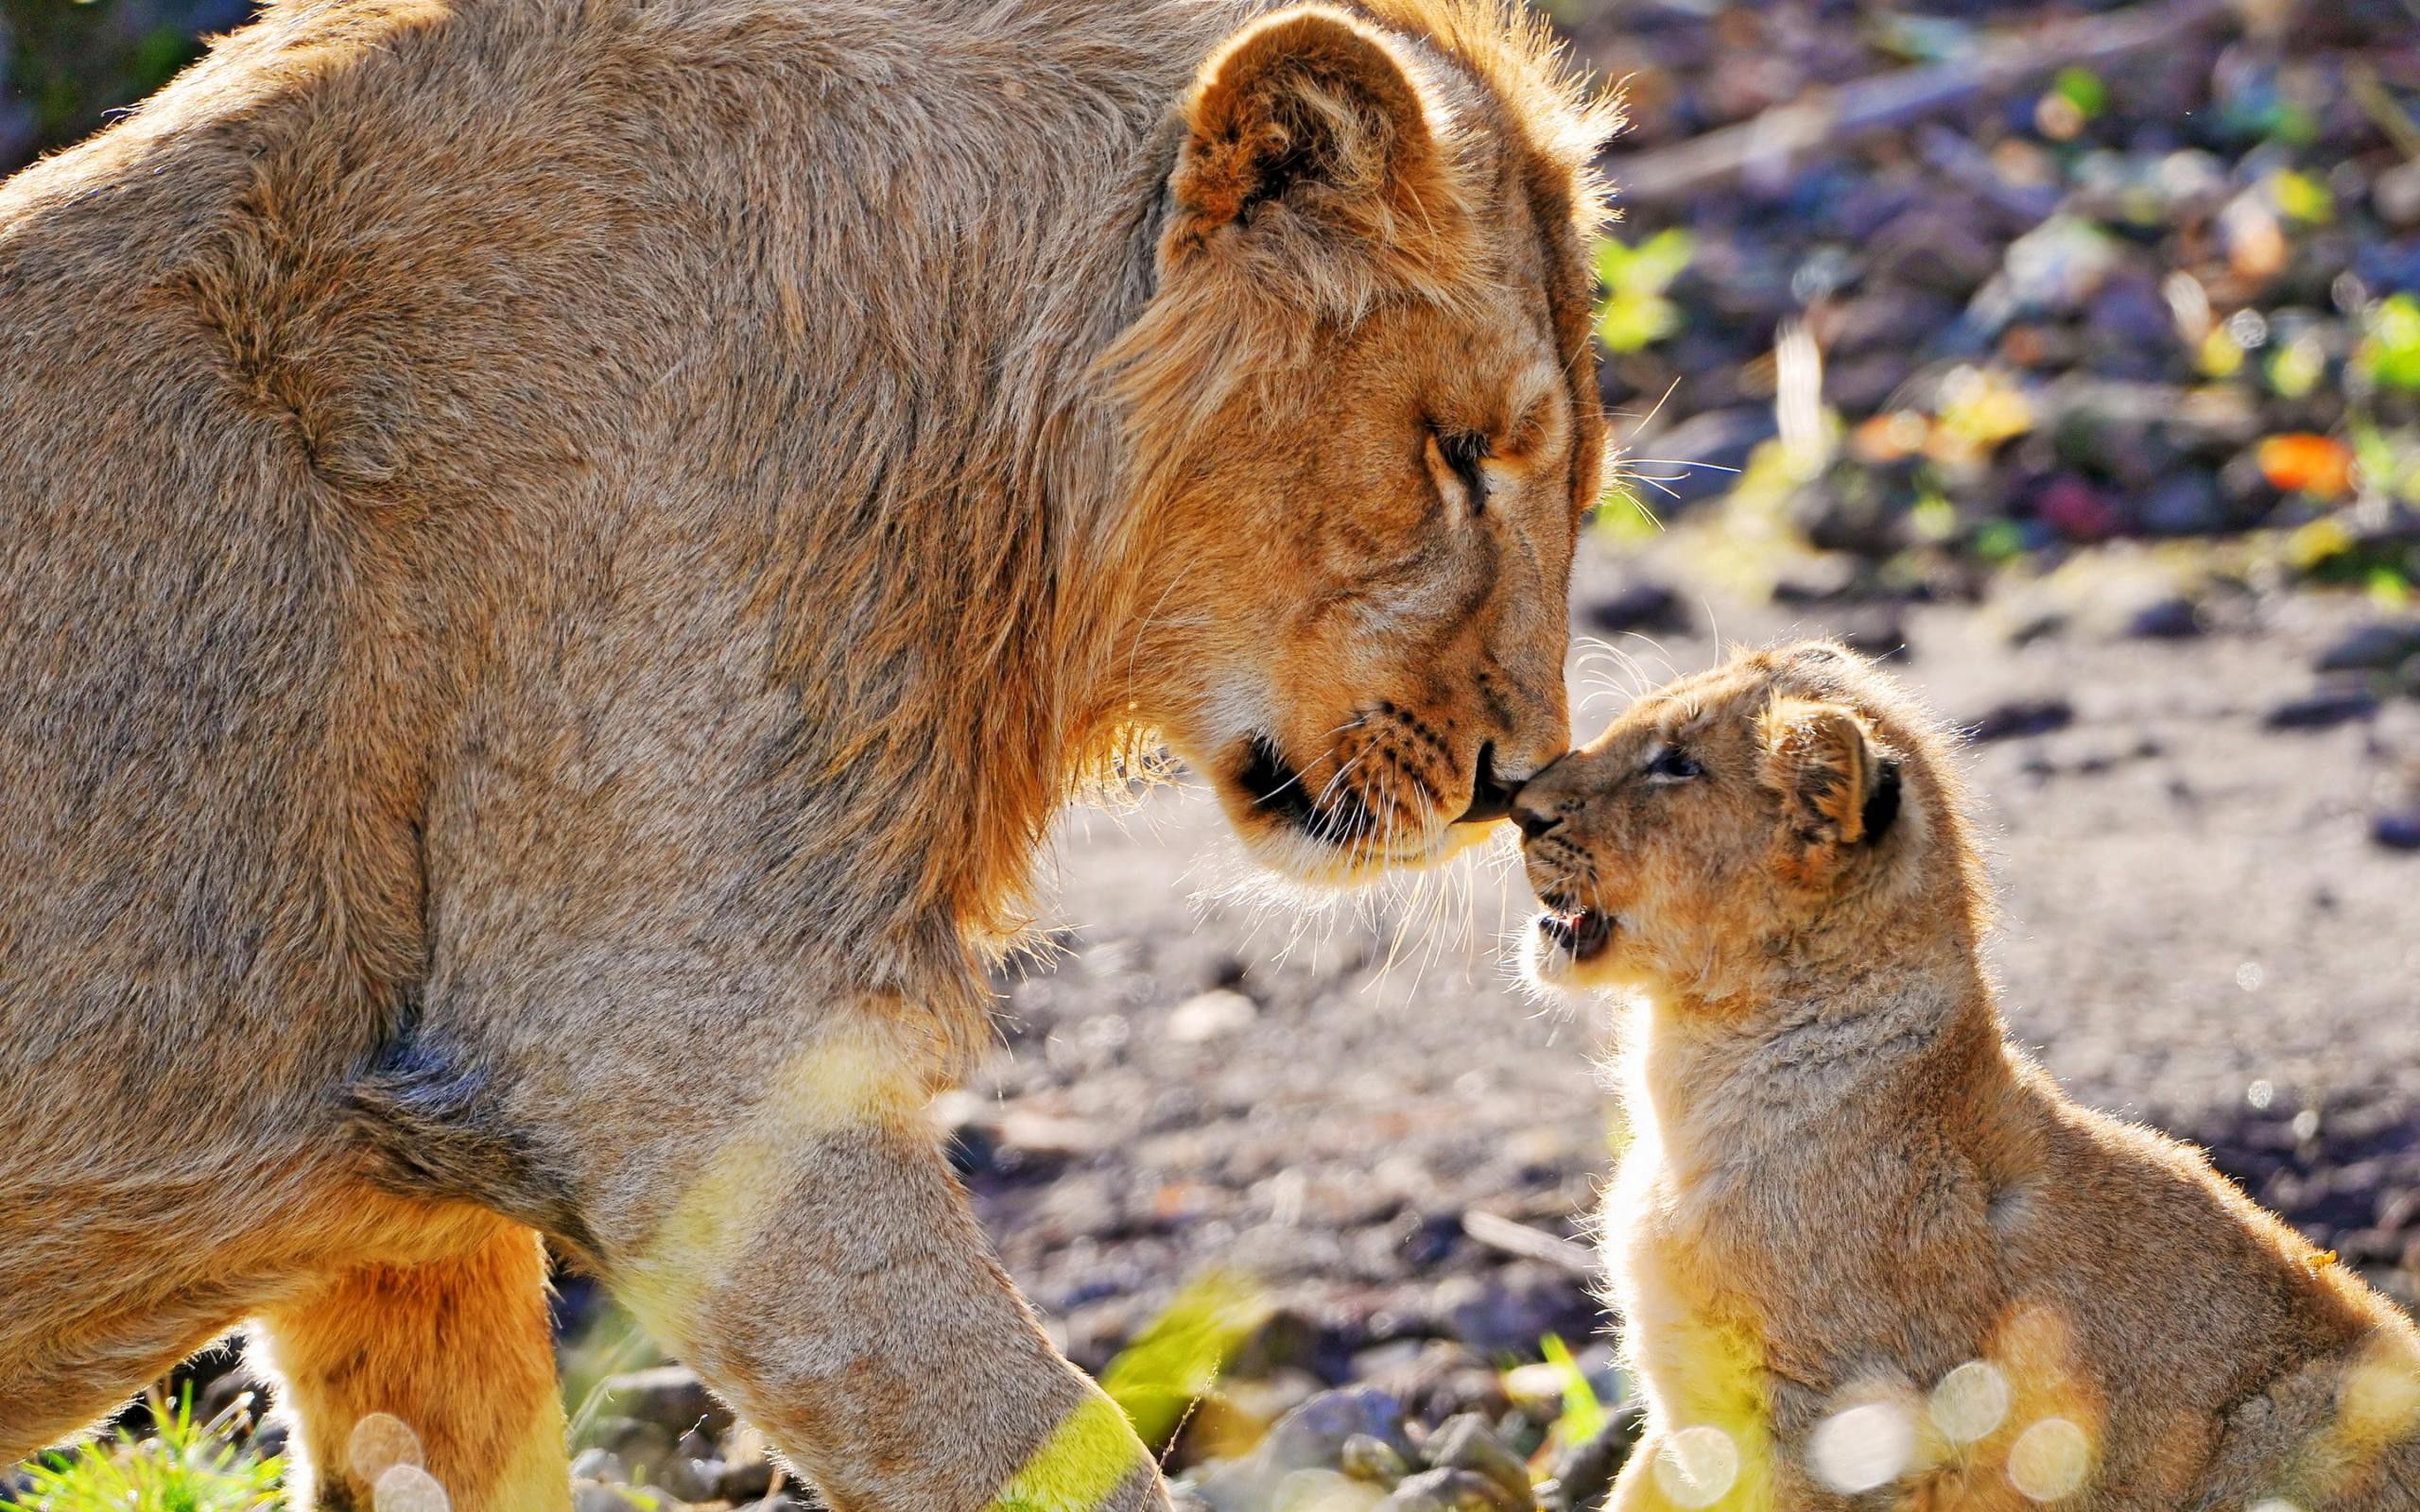 care, joey, animals, young, lion, tenderness